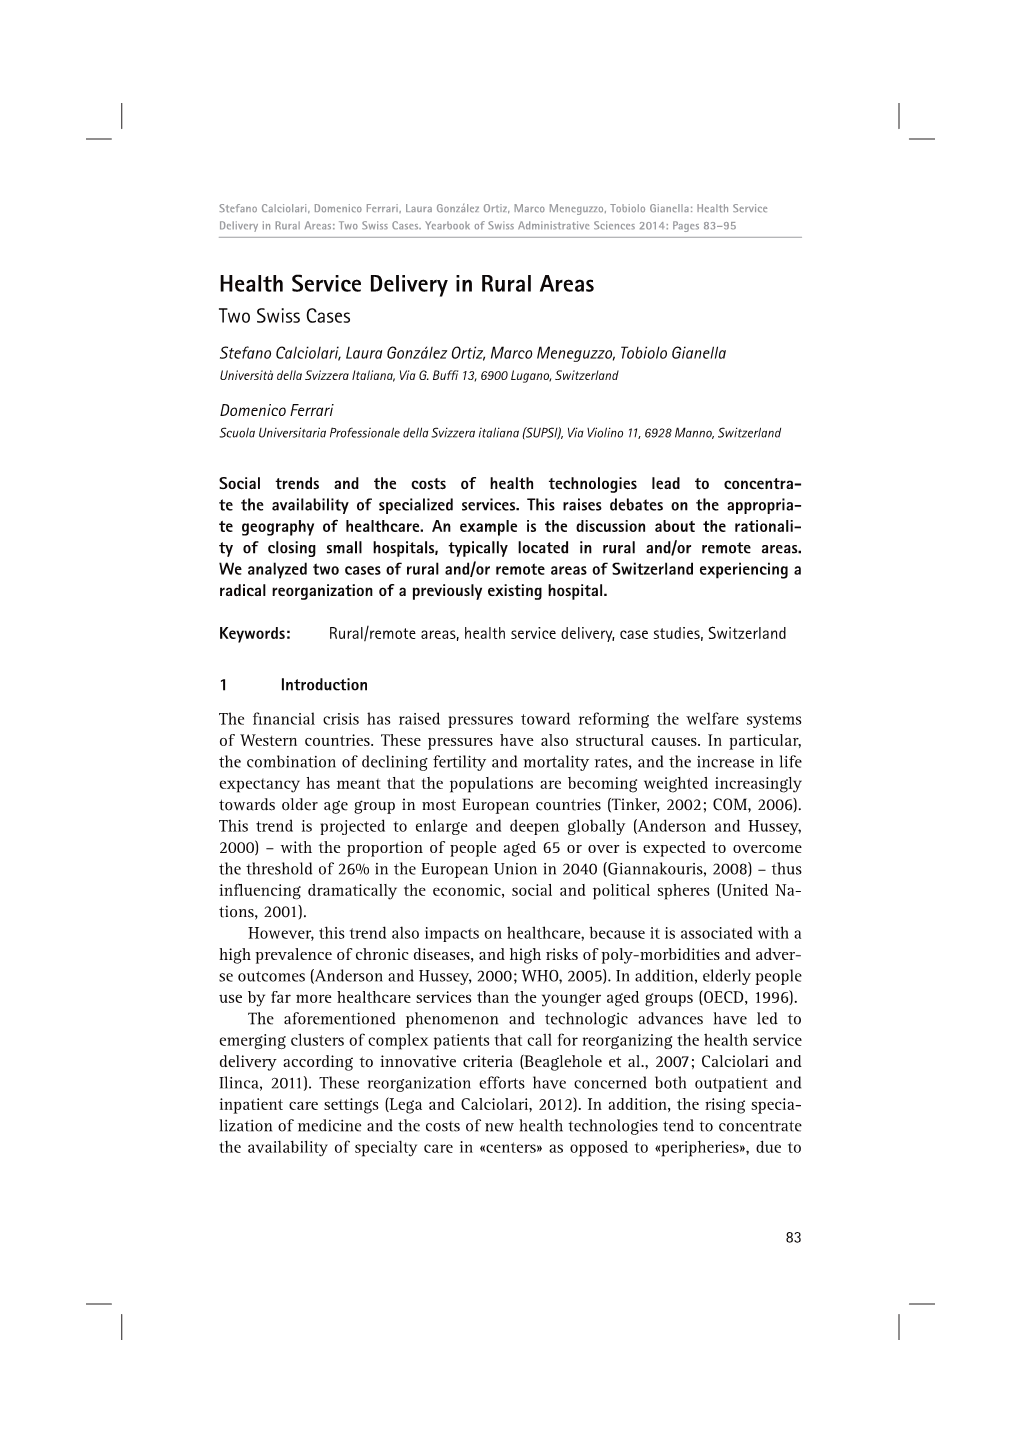 Health Service Delivery in Rural Areas: Two Swiss Cases